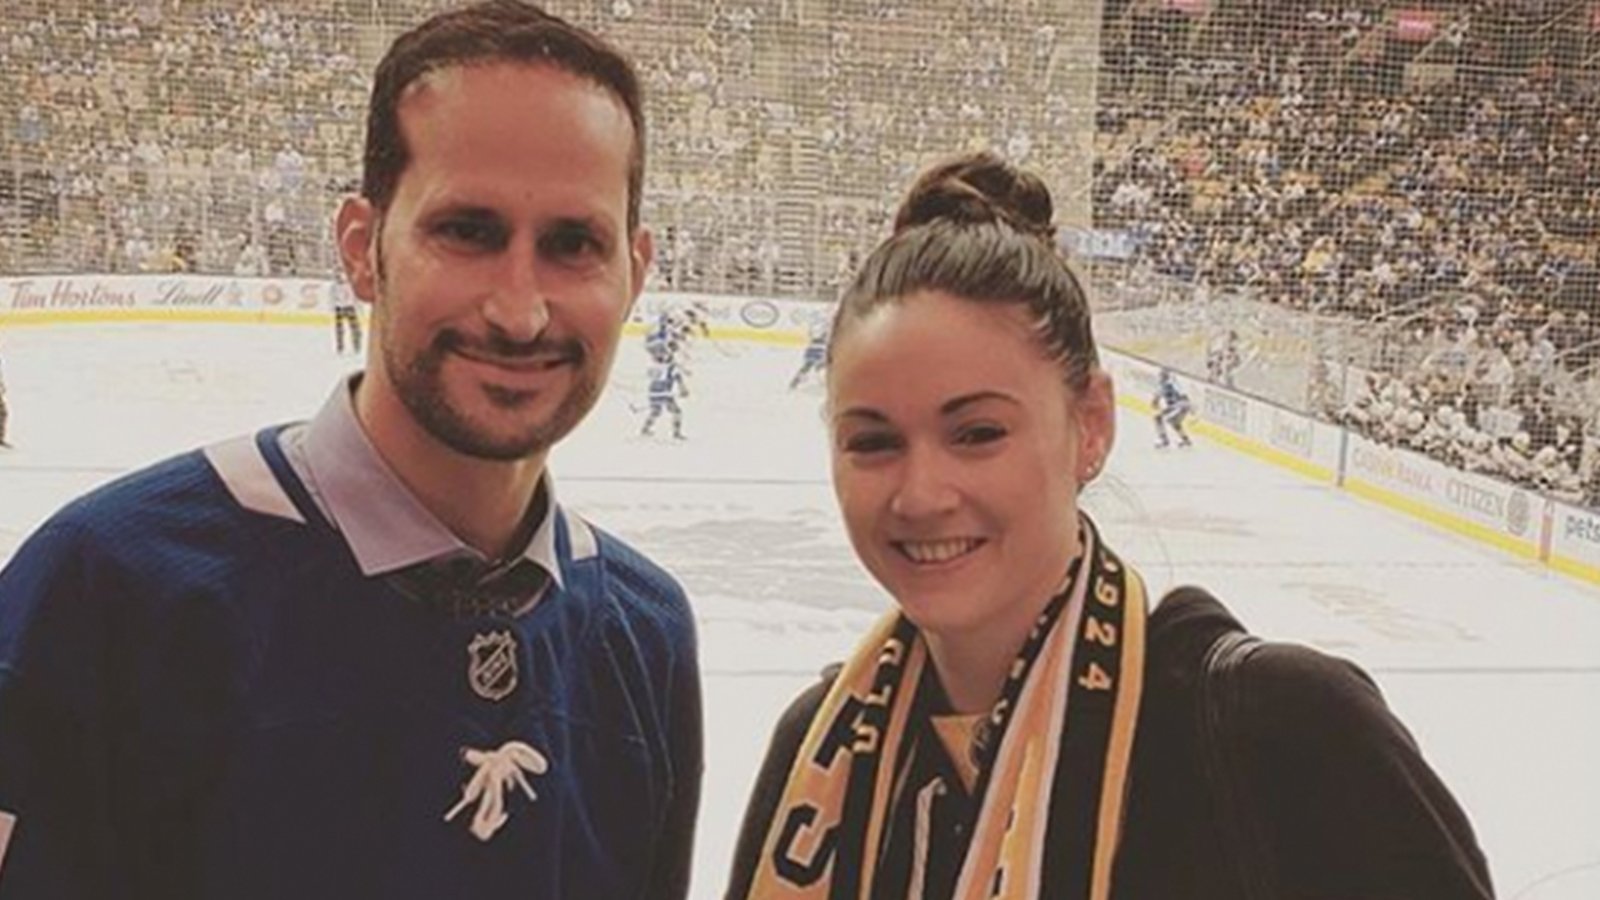 Couple puts their newborn son on the line in epic Leafs vs Bruins bet